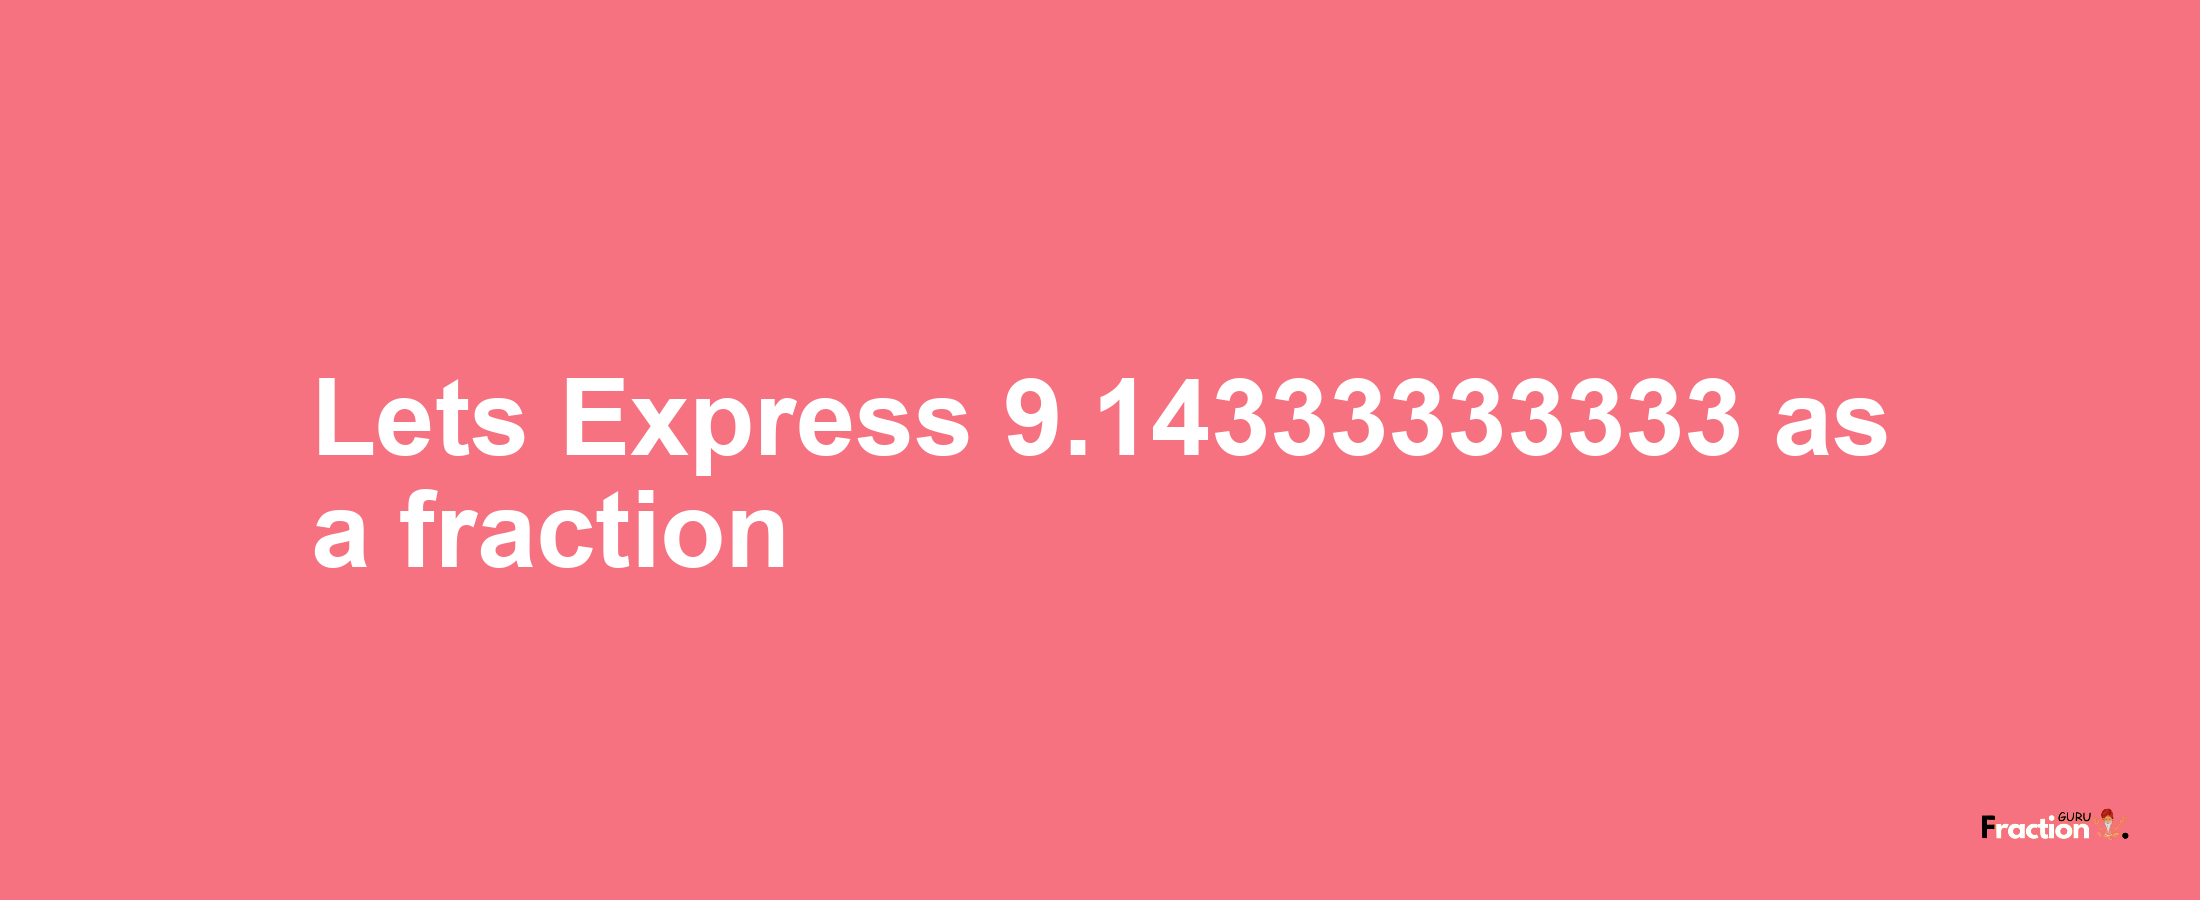 Lets Express 9.14333333333 as afraction